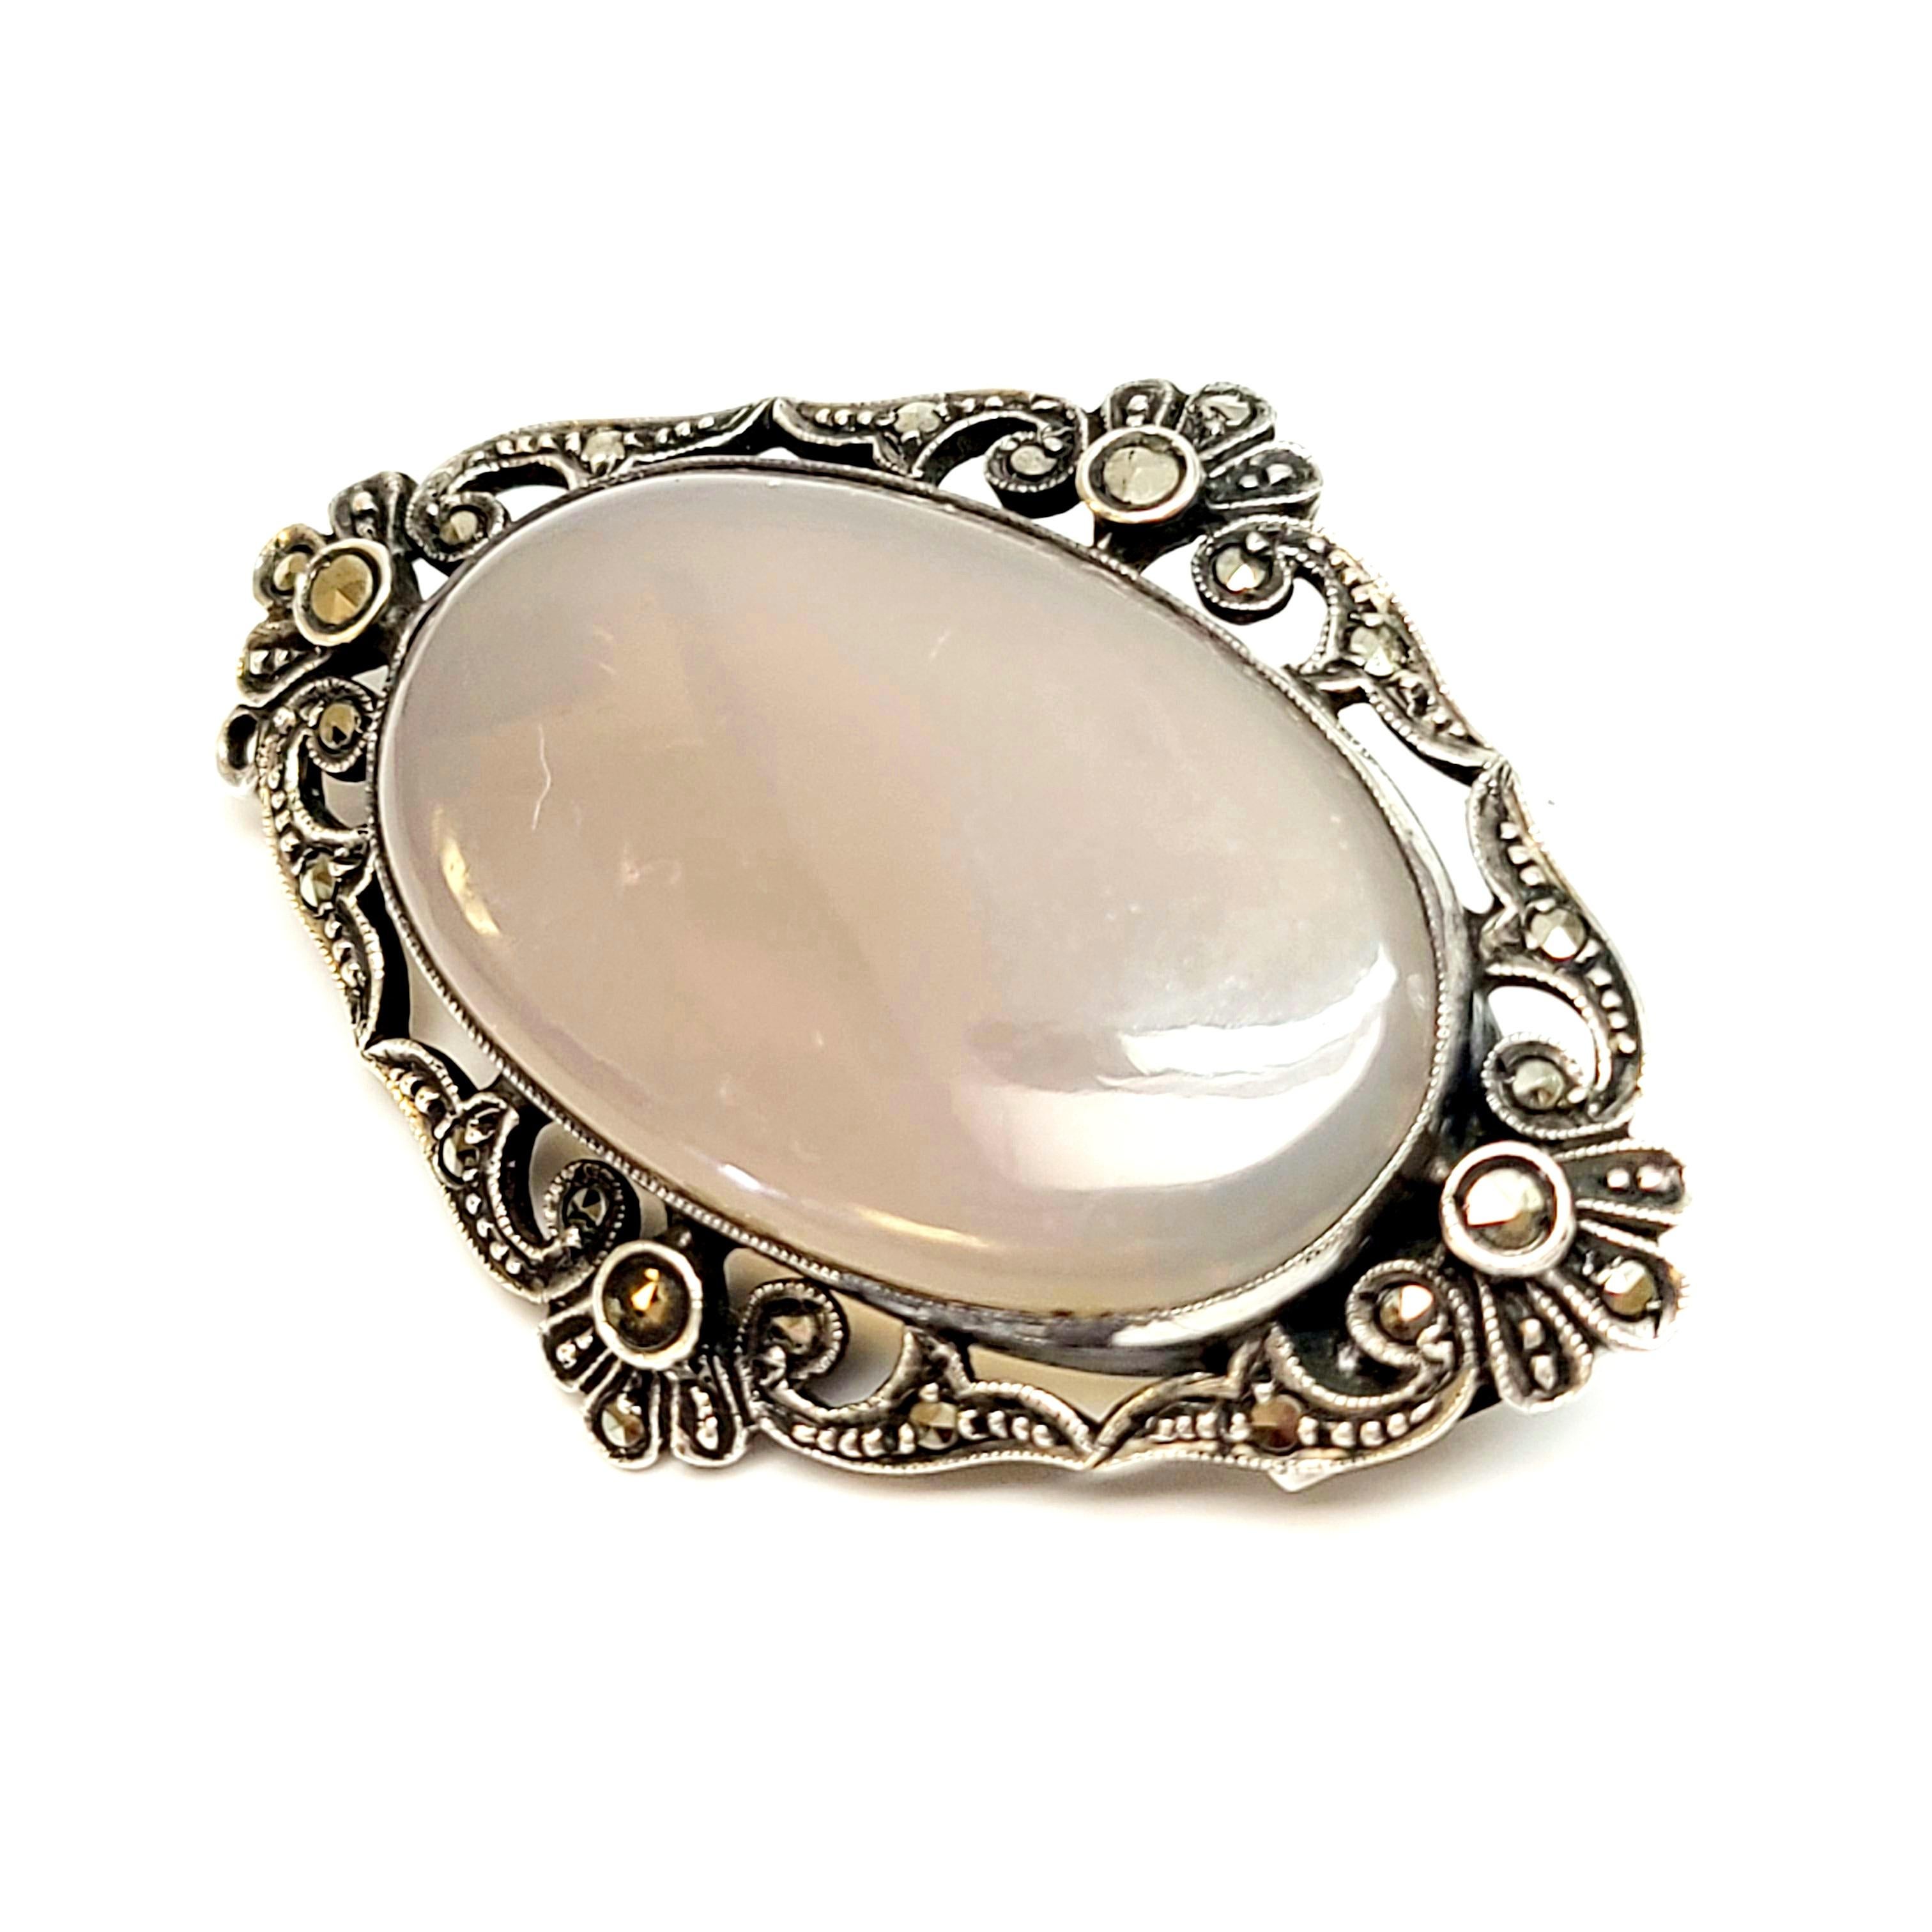 A German sterling silver, marcasite and gray stone pin/brooch.

An oval translucent gray stone is bezel set in an ornate sterling silver and marcasite setting.

Measures approx 1 3/4